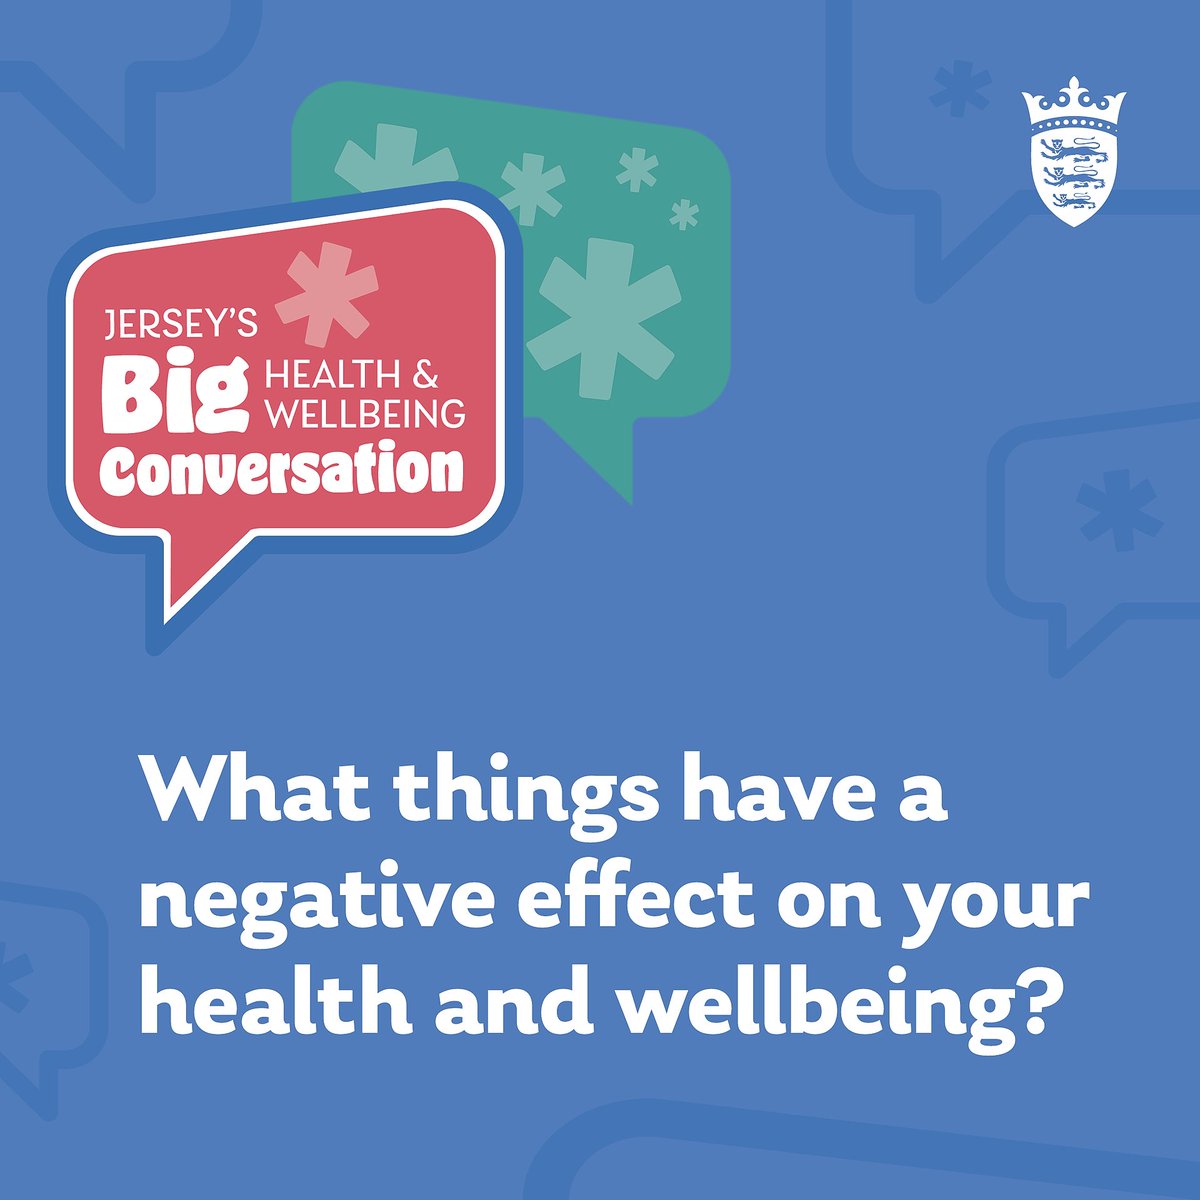 We want to help protect and improve your mental health and wellbeing. Give your views at gov.je/healthconversa… to help inform decisions on the Public Health Strategy for the Island and identify areas that matter most to you.